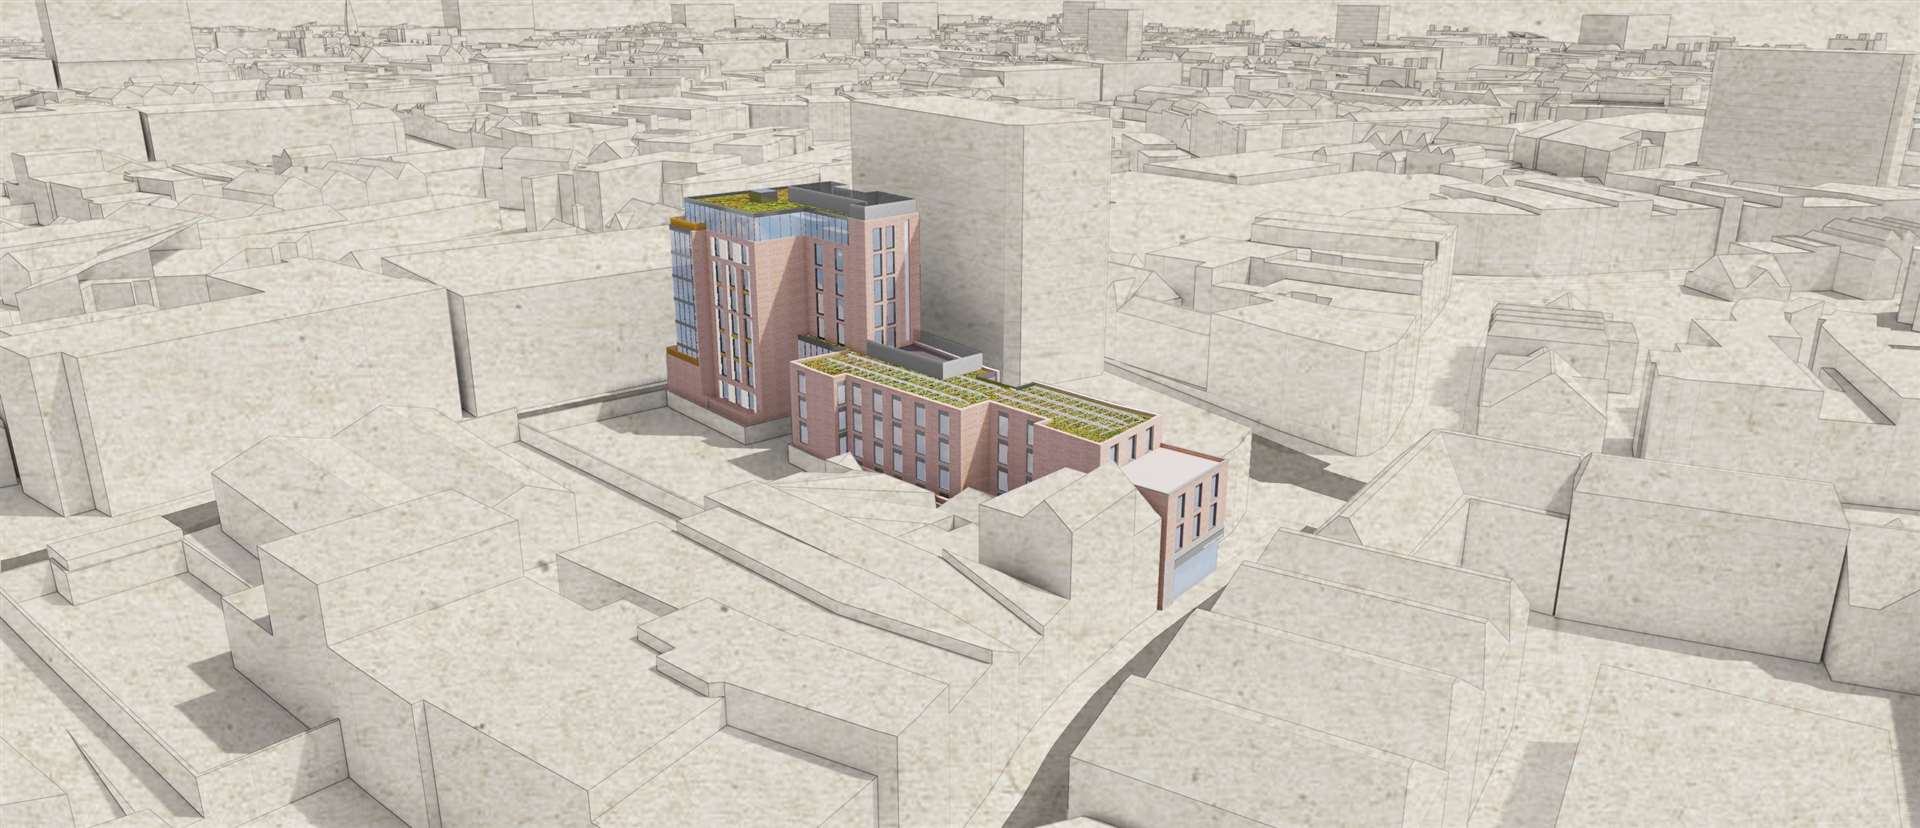 An artist's impression of what the 132-room Week Street hotel could have looked like. Picture: Dexter Moren Associates